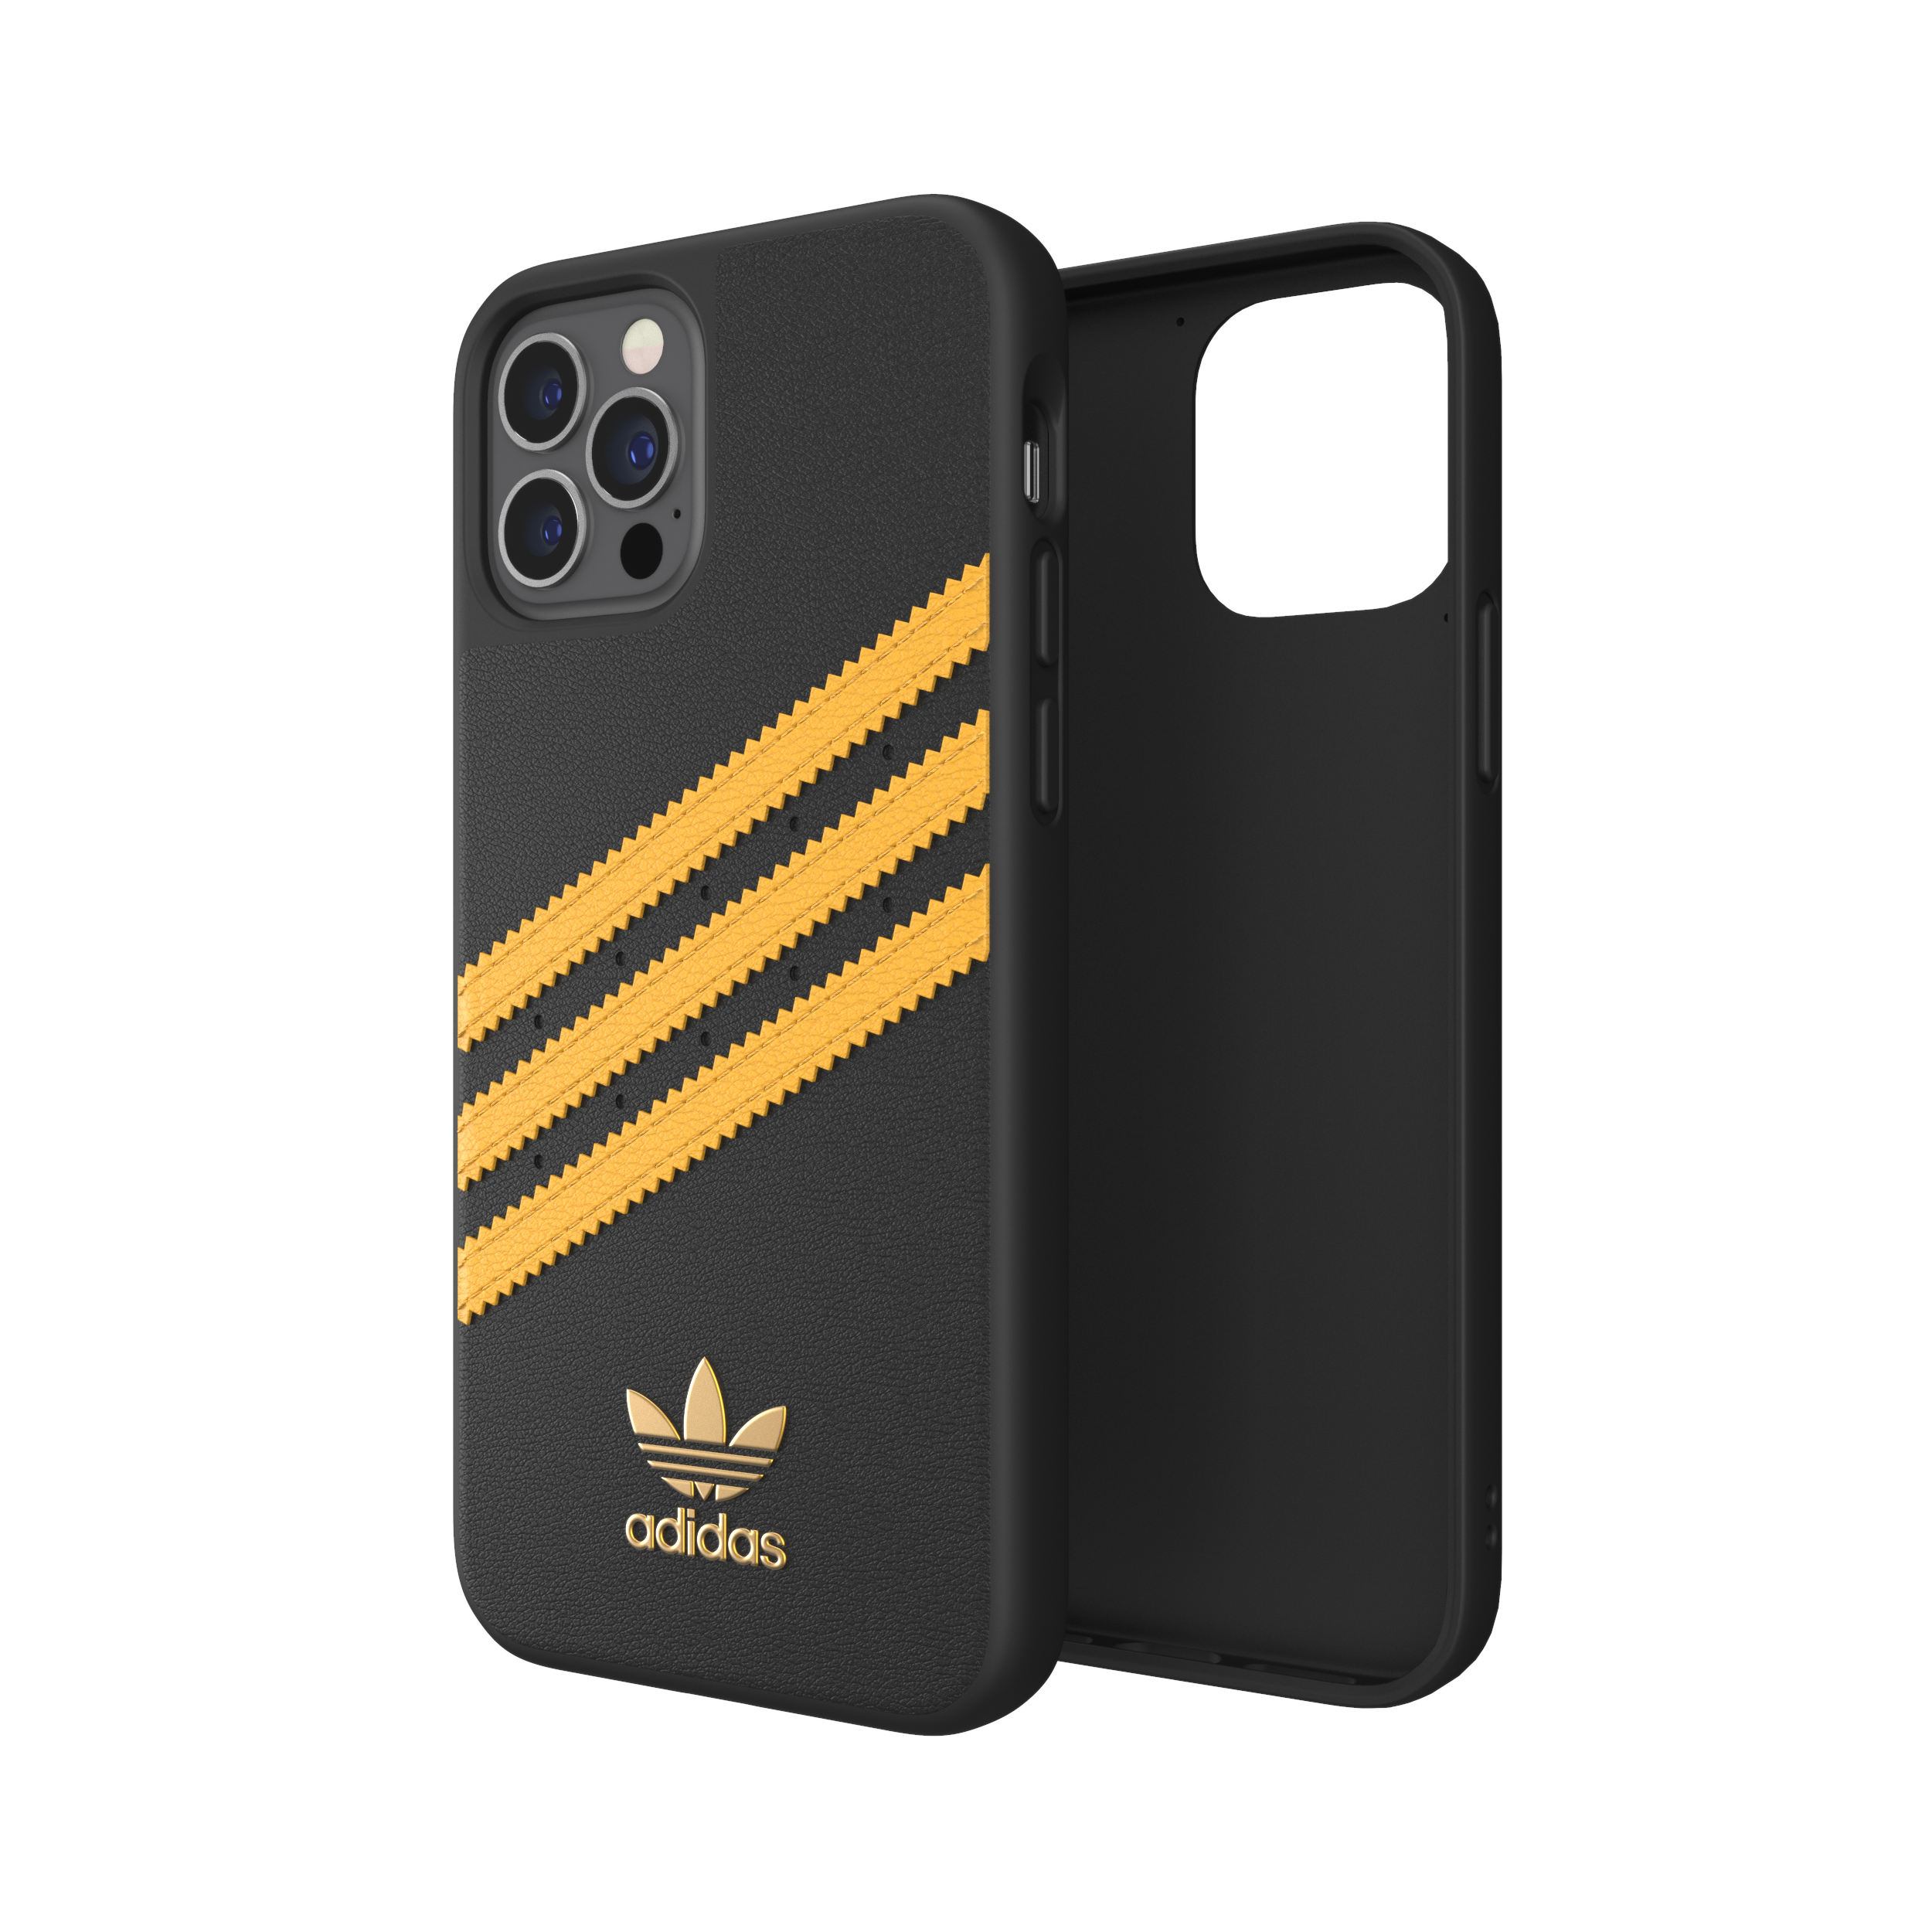 Adidas SAMBA Apple iPhone 12 / 12 Pro Moulded Case - Back cover w/ 3 Stripes & Trefoil Design, Scratch & Drop Protection w/ TPU Bumper, Wireless Charging Compatible - Black/Gold